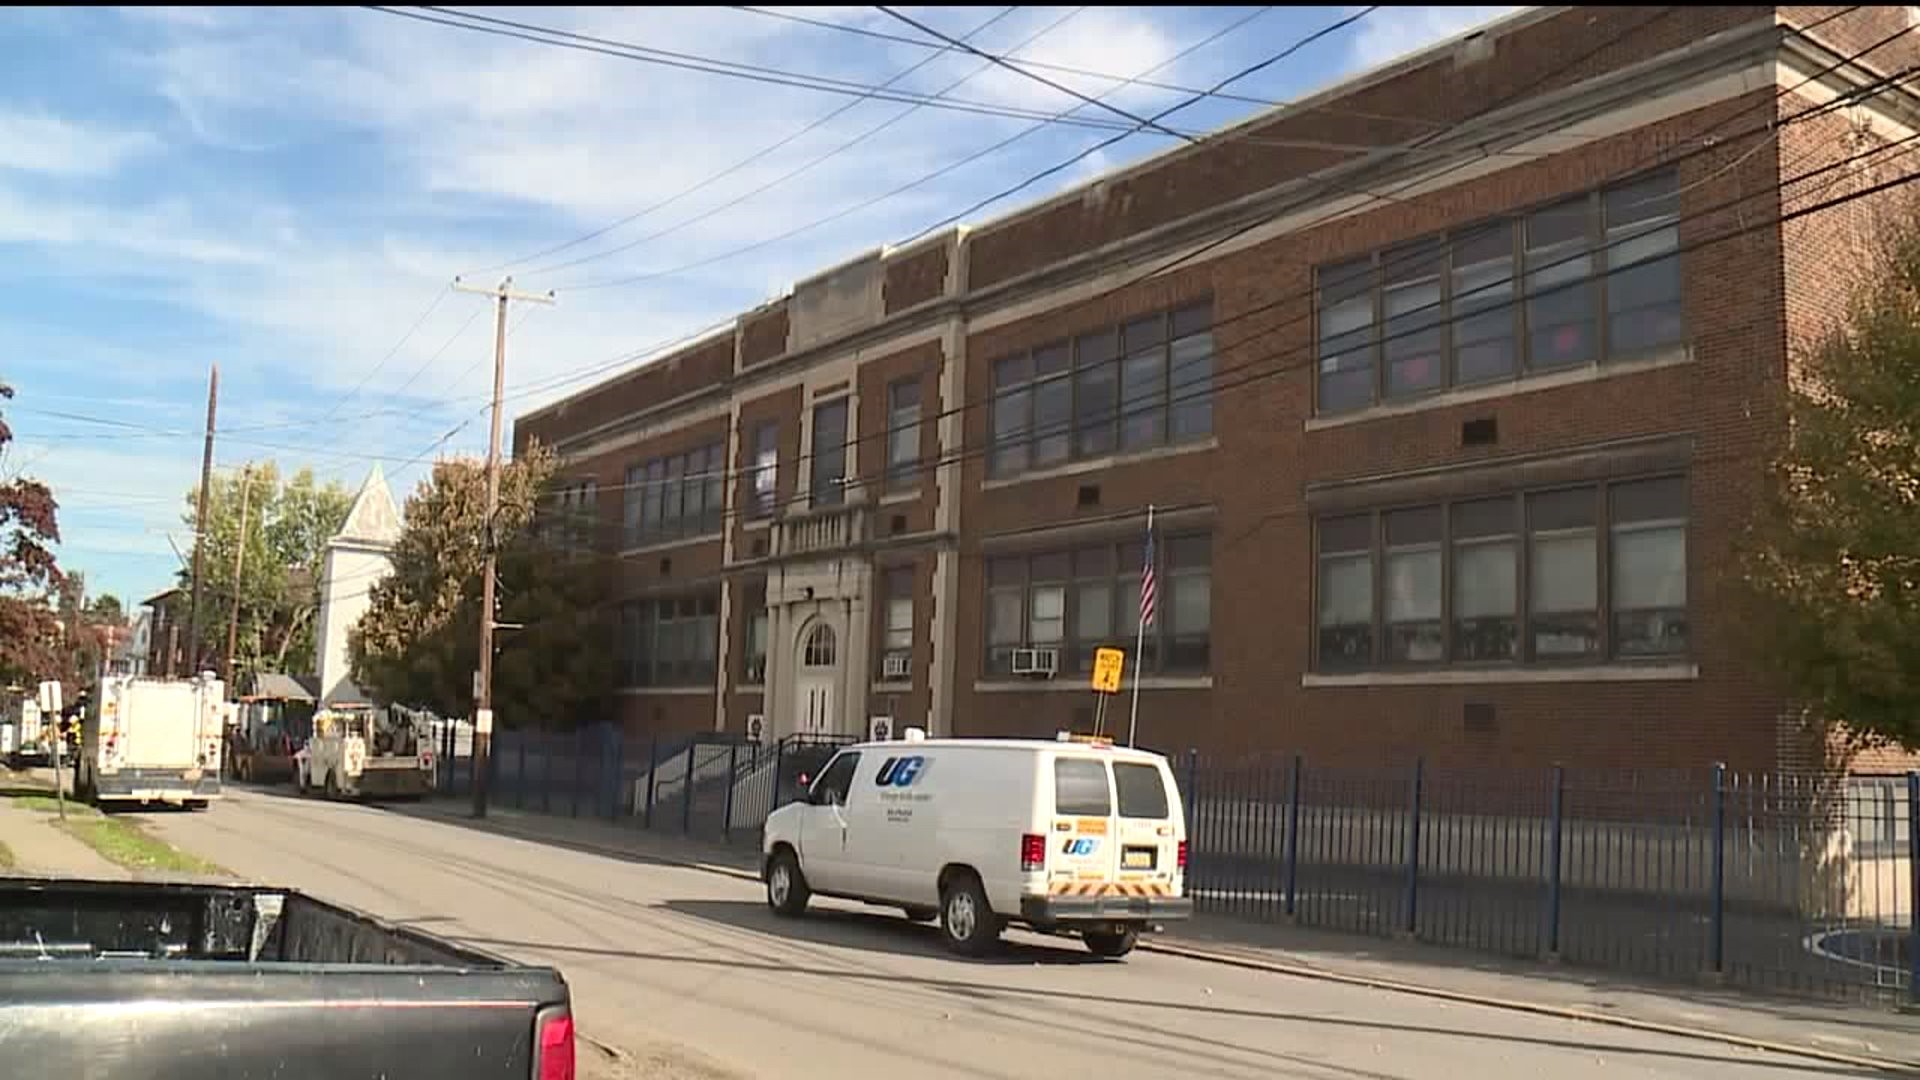 Students Dismissed from Bancroft Elementary in Scranton after Utility Problem